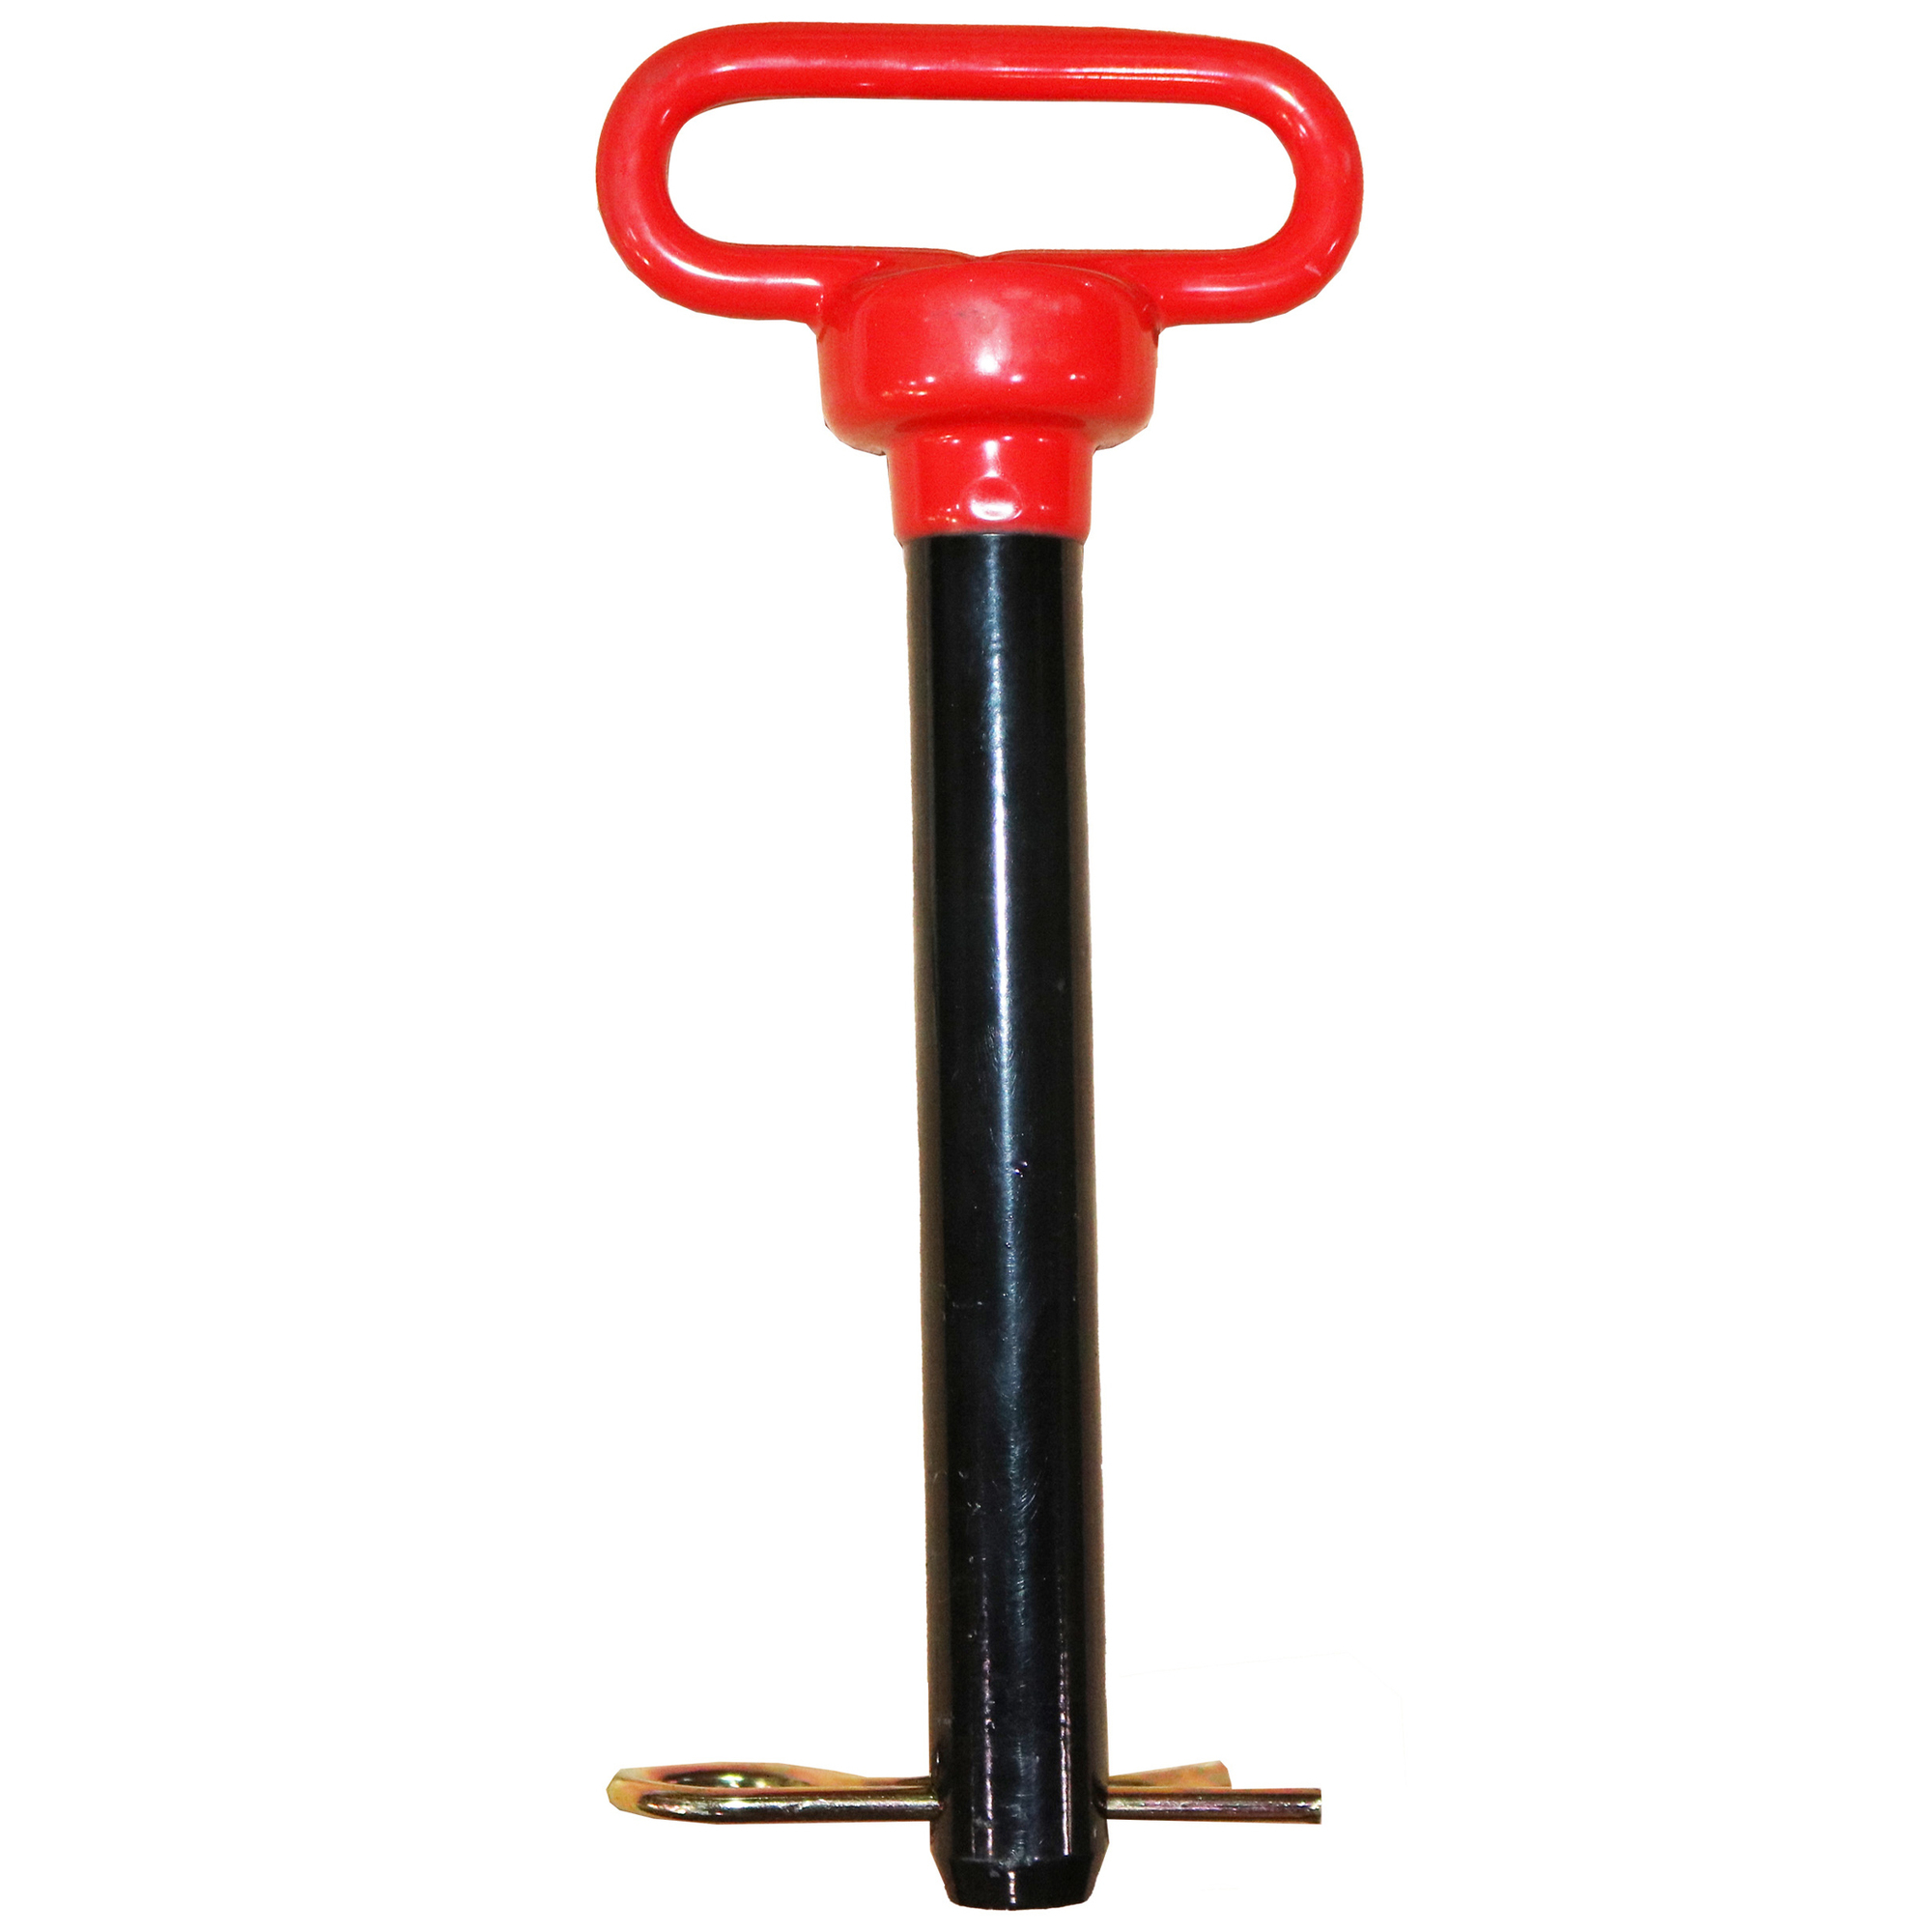 Braber Equipment, Grade 5 Forged Hitch Pin, 1Inch Diameter, Usable Length 7.5 in, Model 706HPR